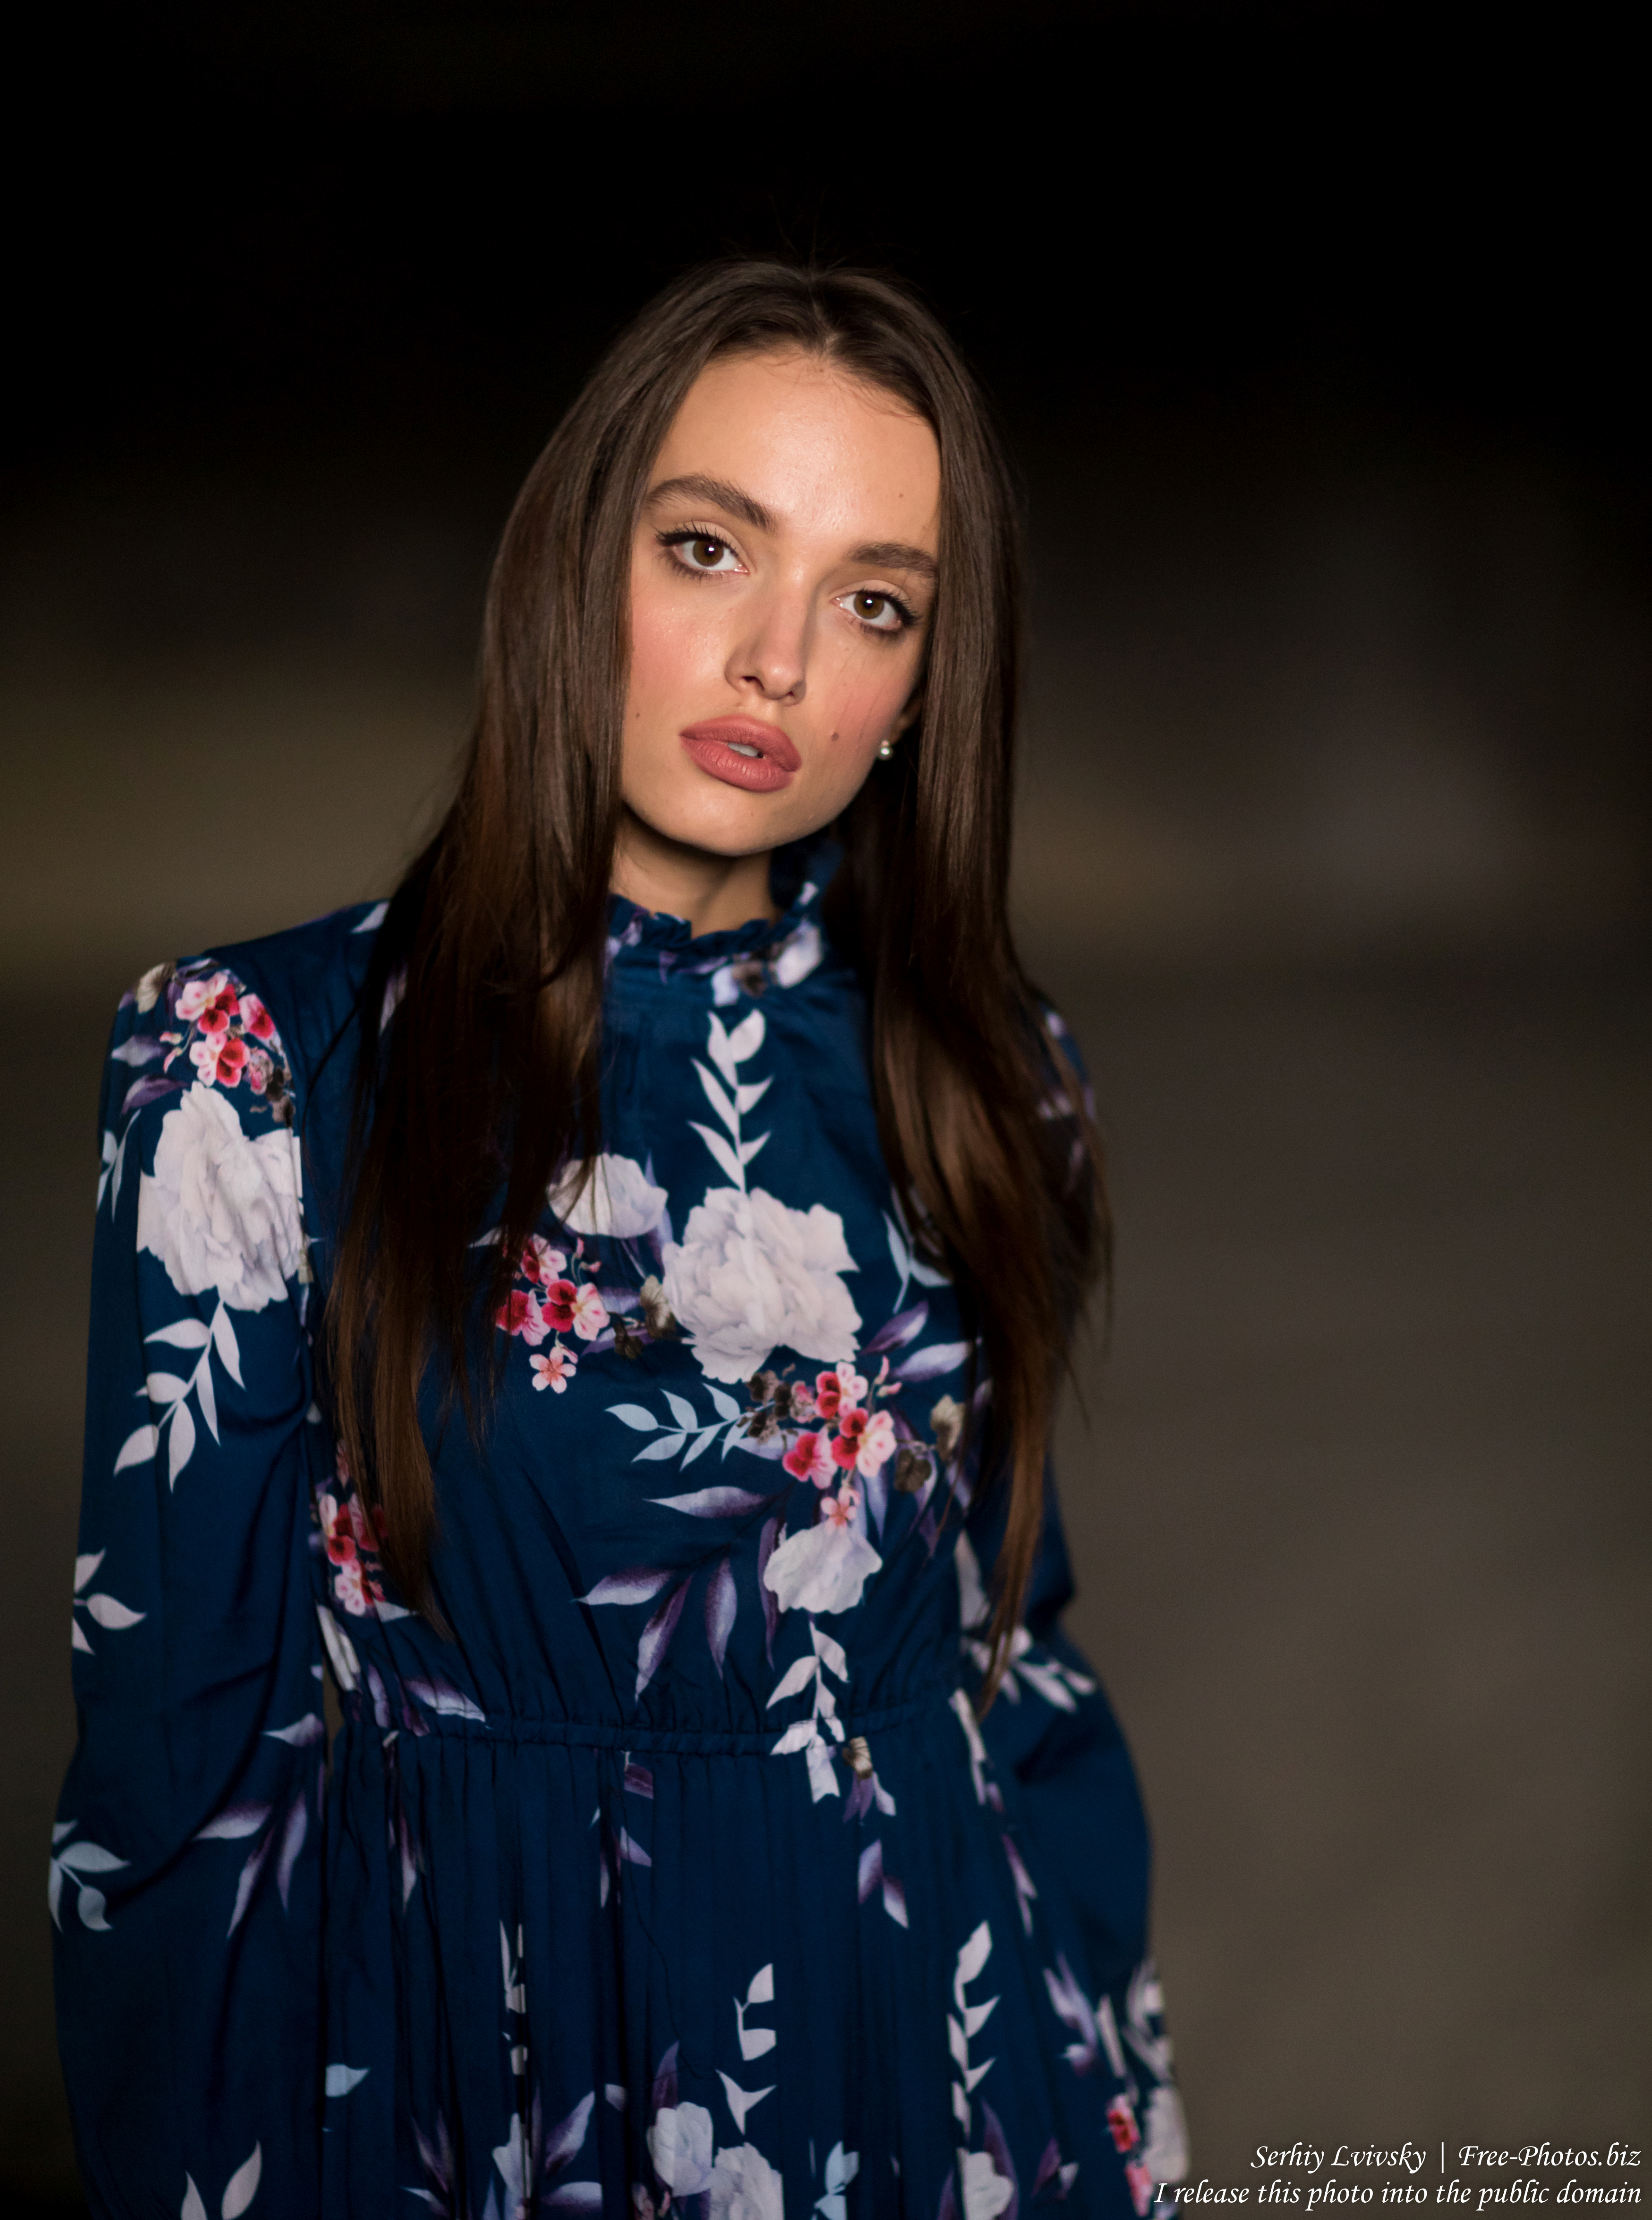 tonya_a_23-year-old_brunette_girl_photographed_in_august_2019_by_serhiy_lvivsky_11